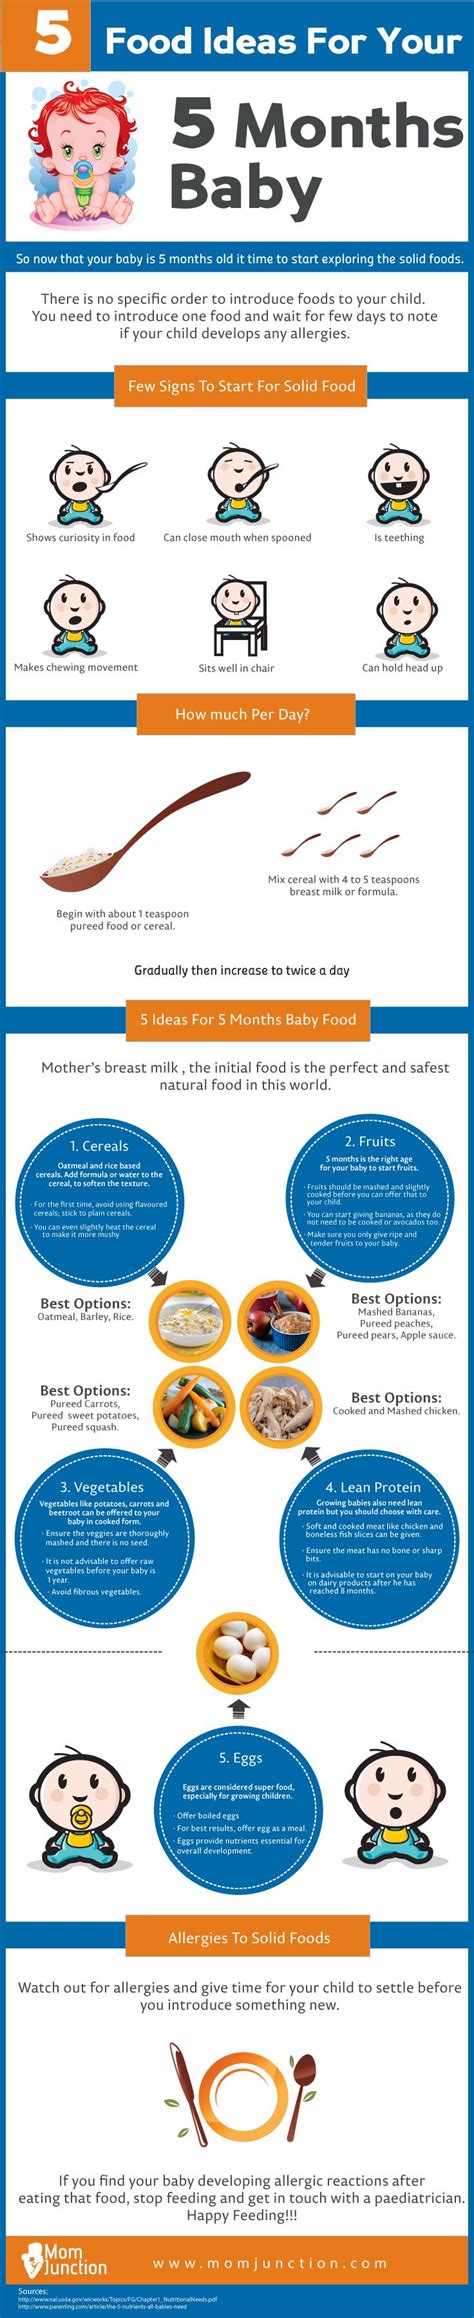 Even if your baby is eating more solid foods. Top 5 Ideas For 5 Months Baby Food | Baby food recipes, 5 ...